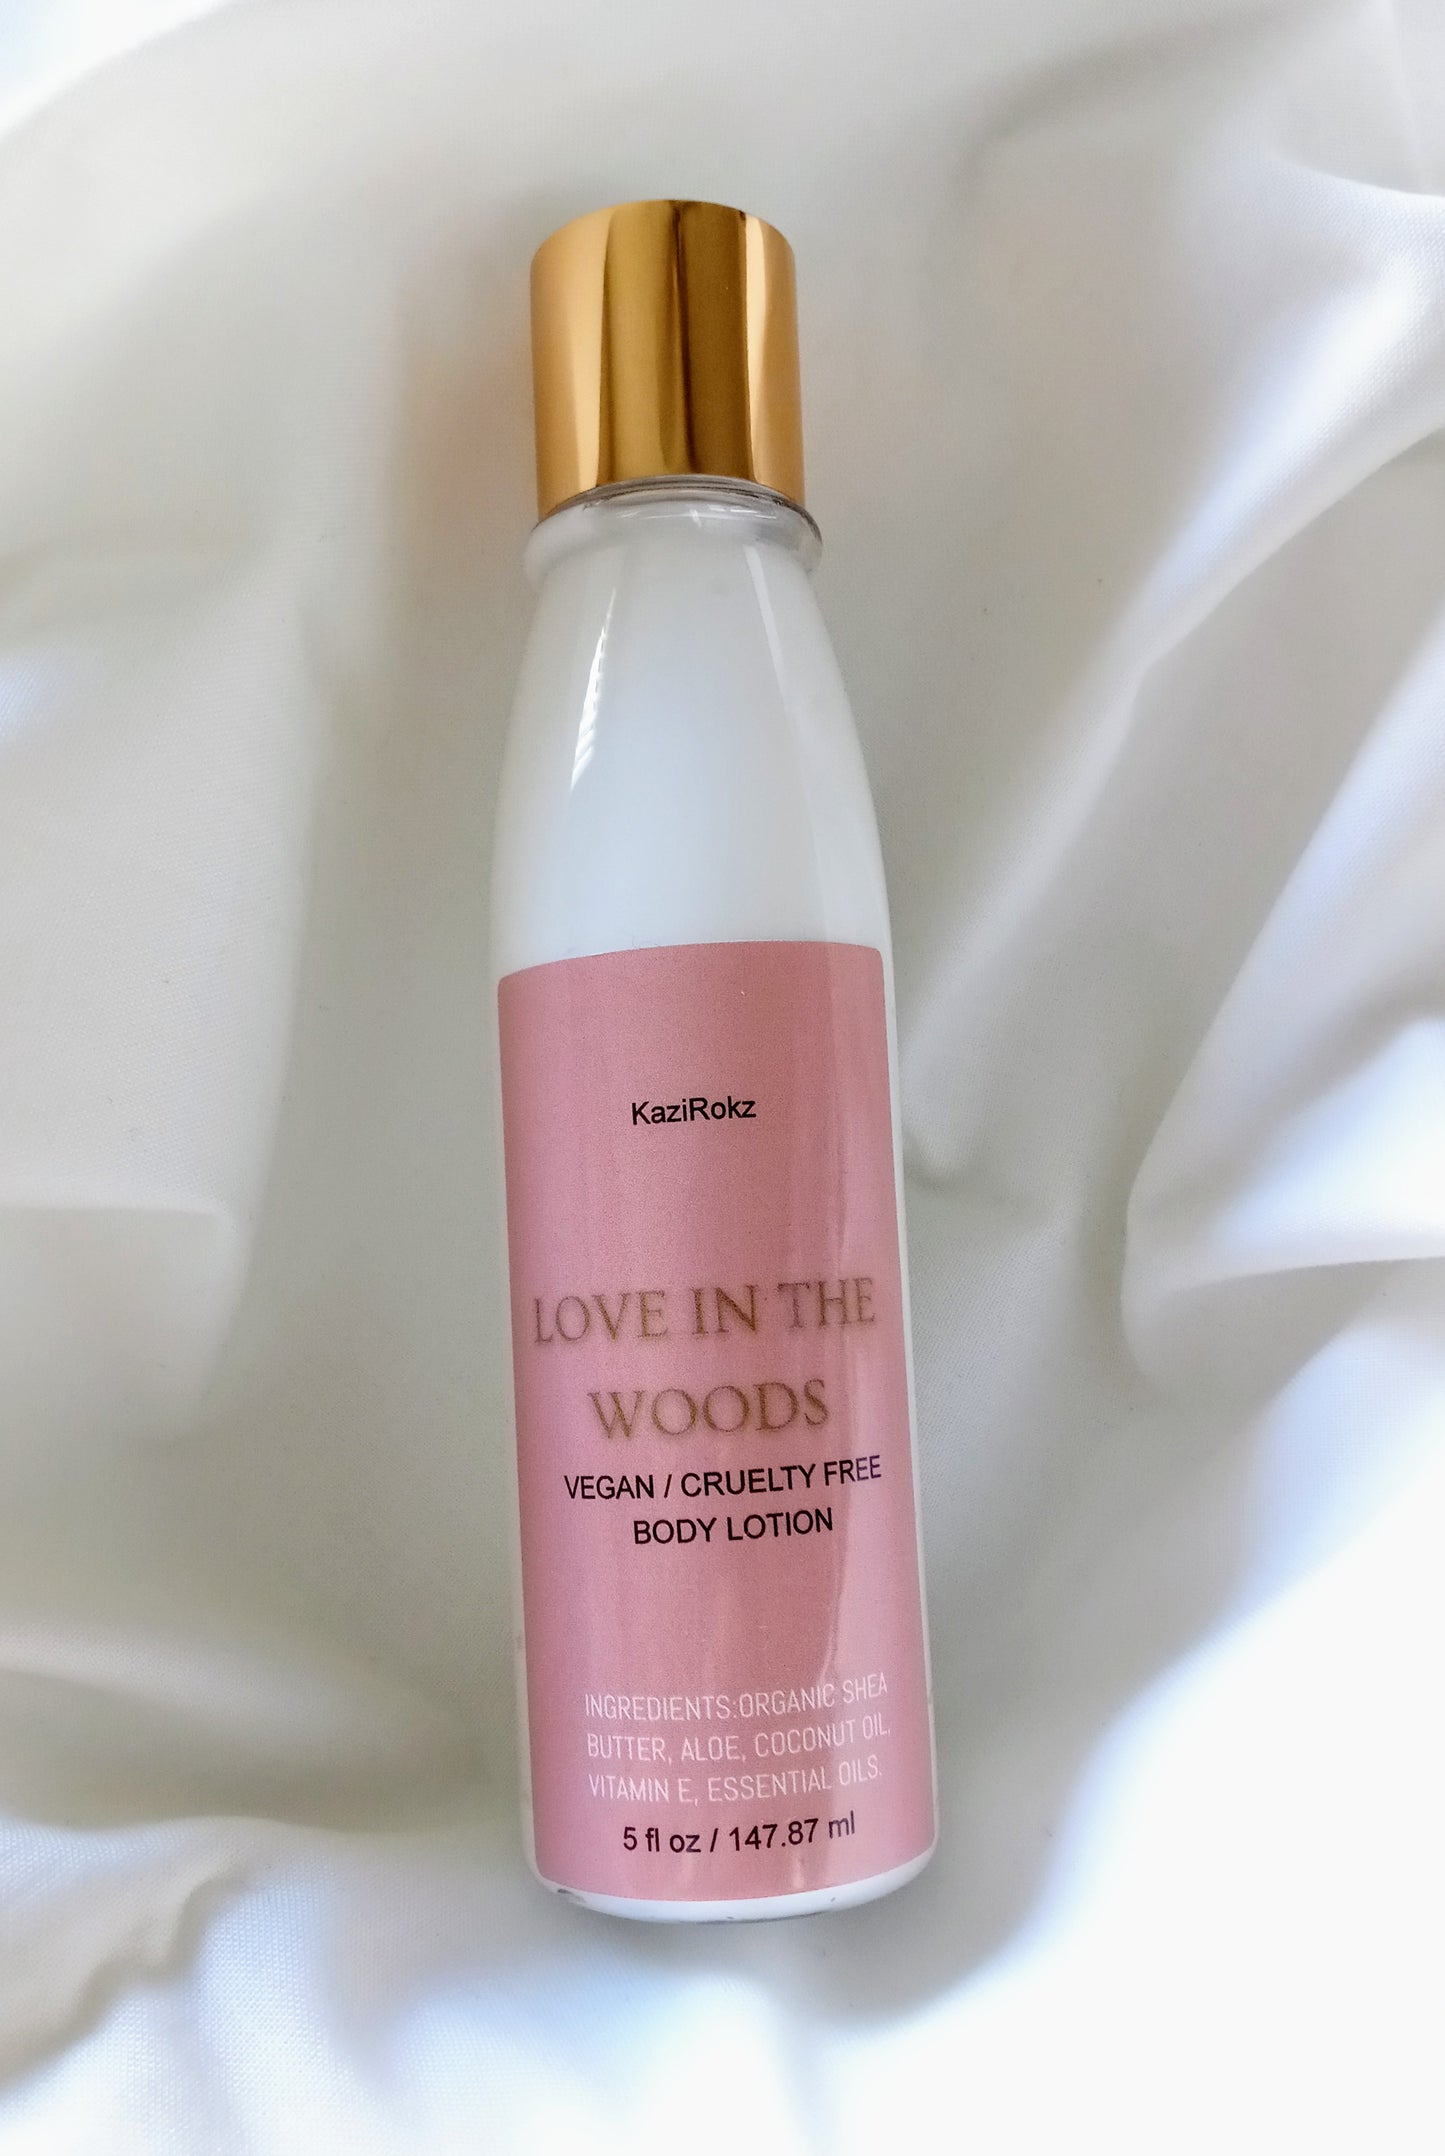 Love In The Woods (100% Vegan / Cruelty Free) Fragrance Body Lotion